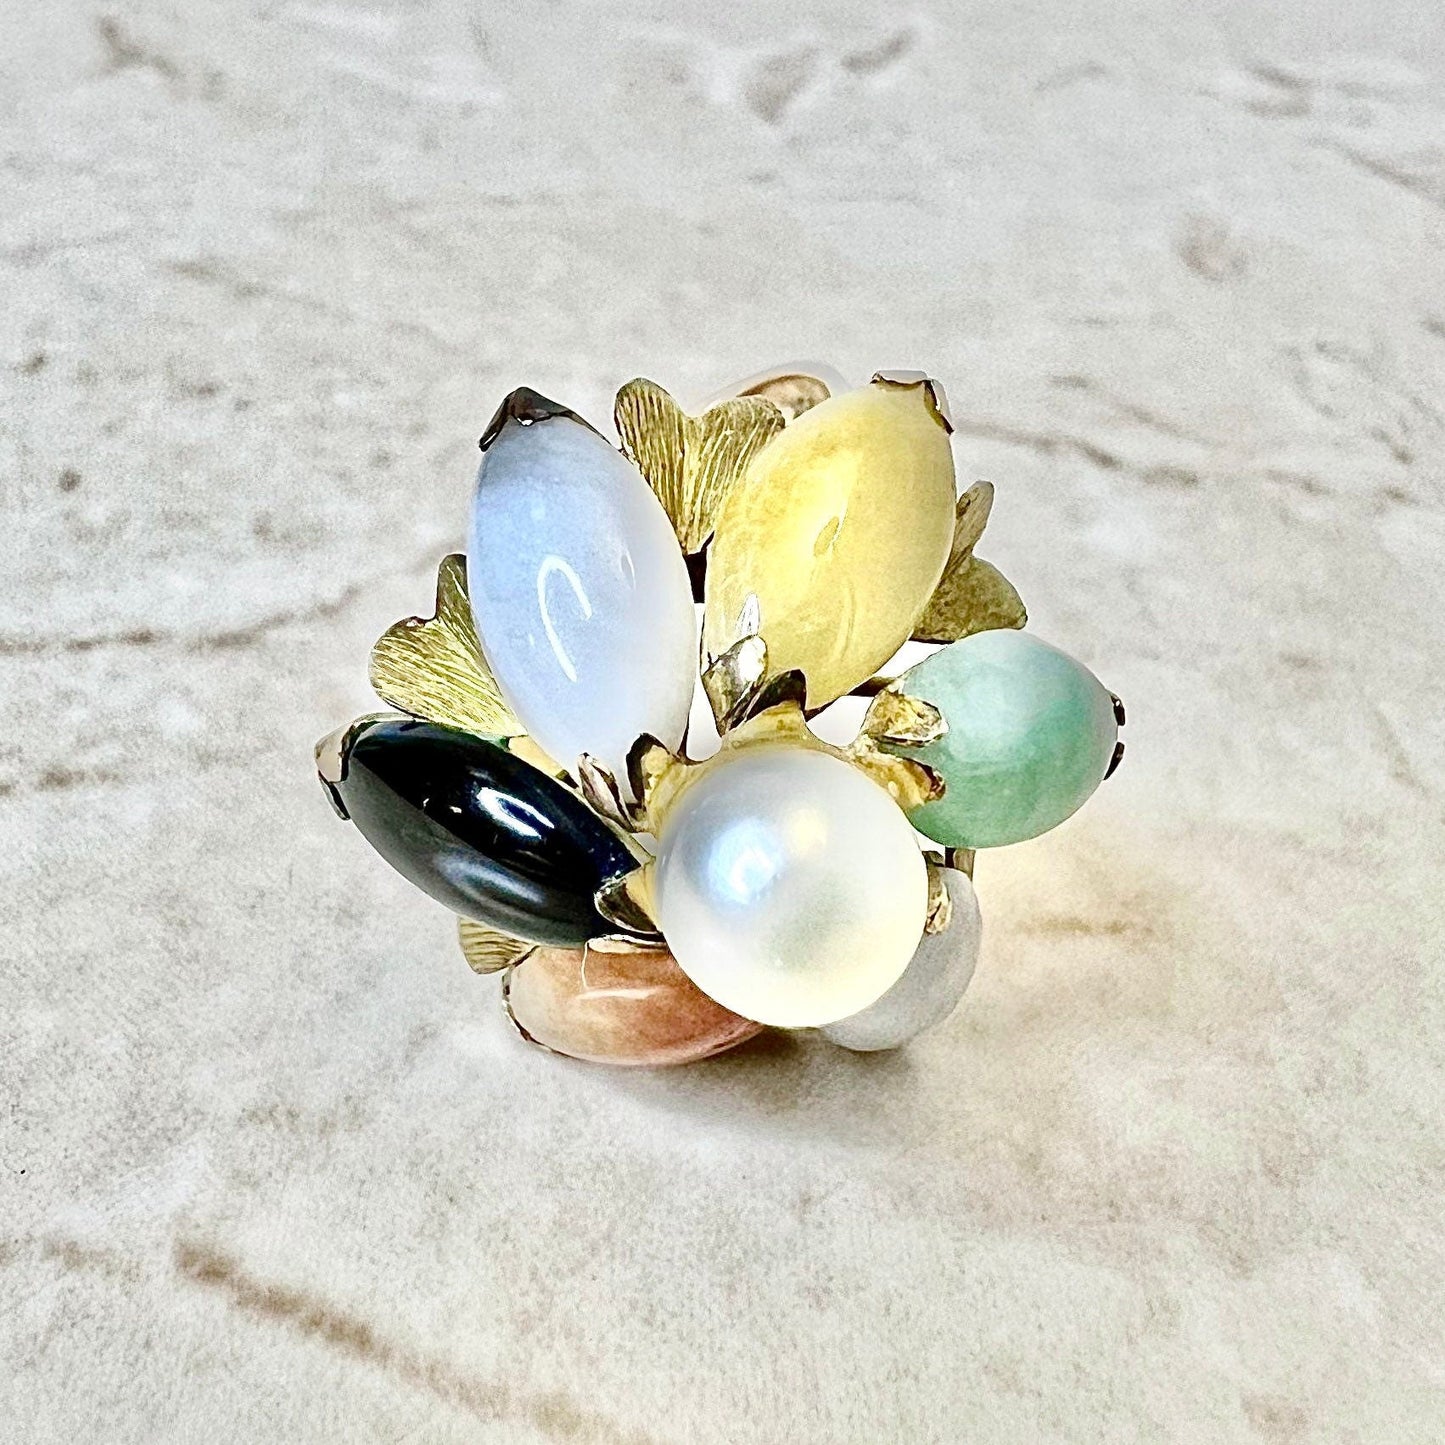 Vintage 18K Natural Multicolor Jadeite And Pearl Cocktail Ring - Rose & Yellow Gold Bauhinia Flower Ring - Jade Jadeite Ring - Gift For Her